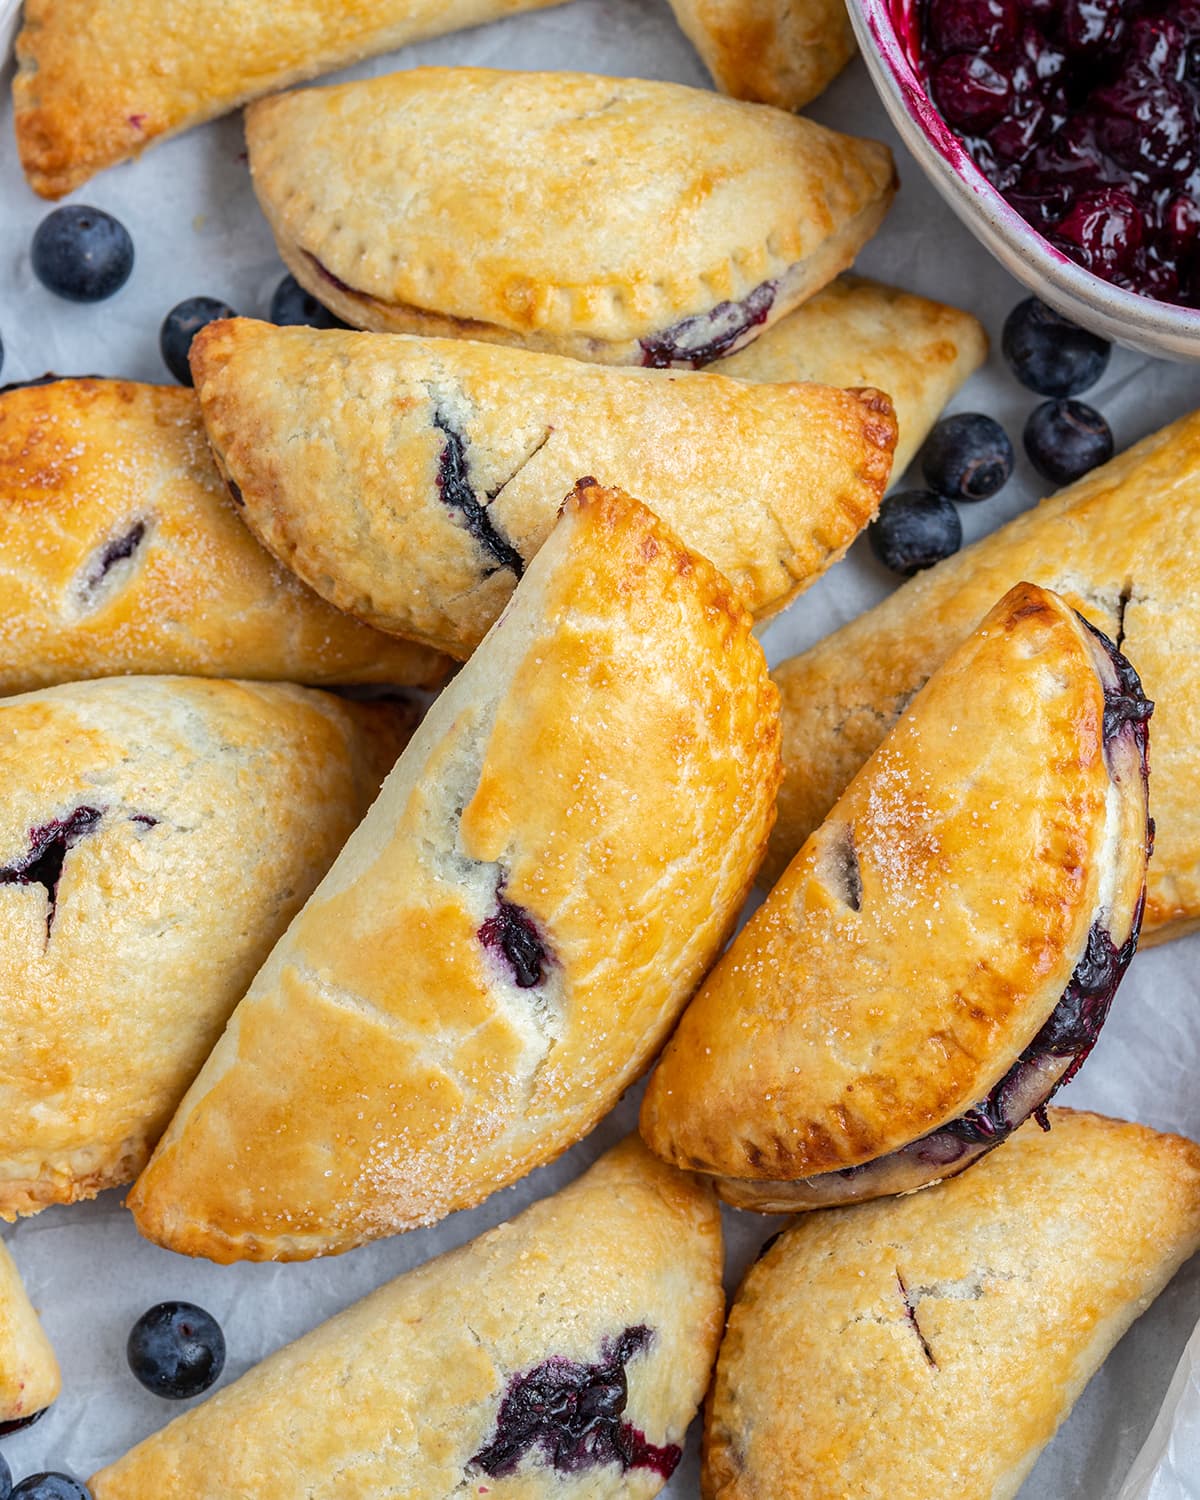 A pile of golden brown hand held blueberry pies.